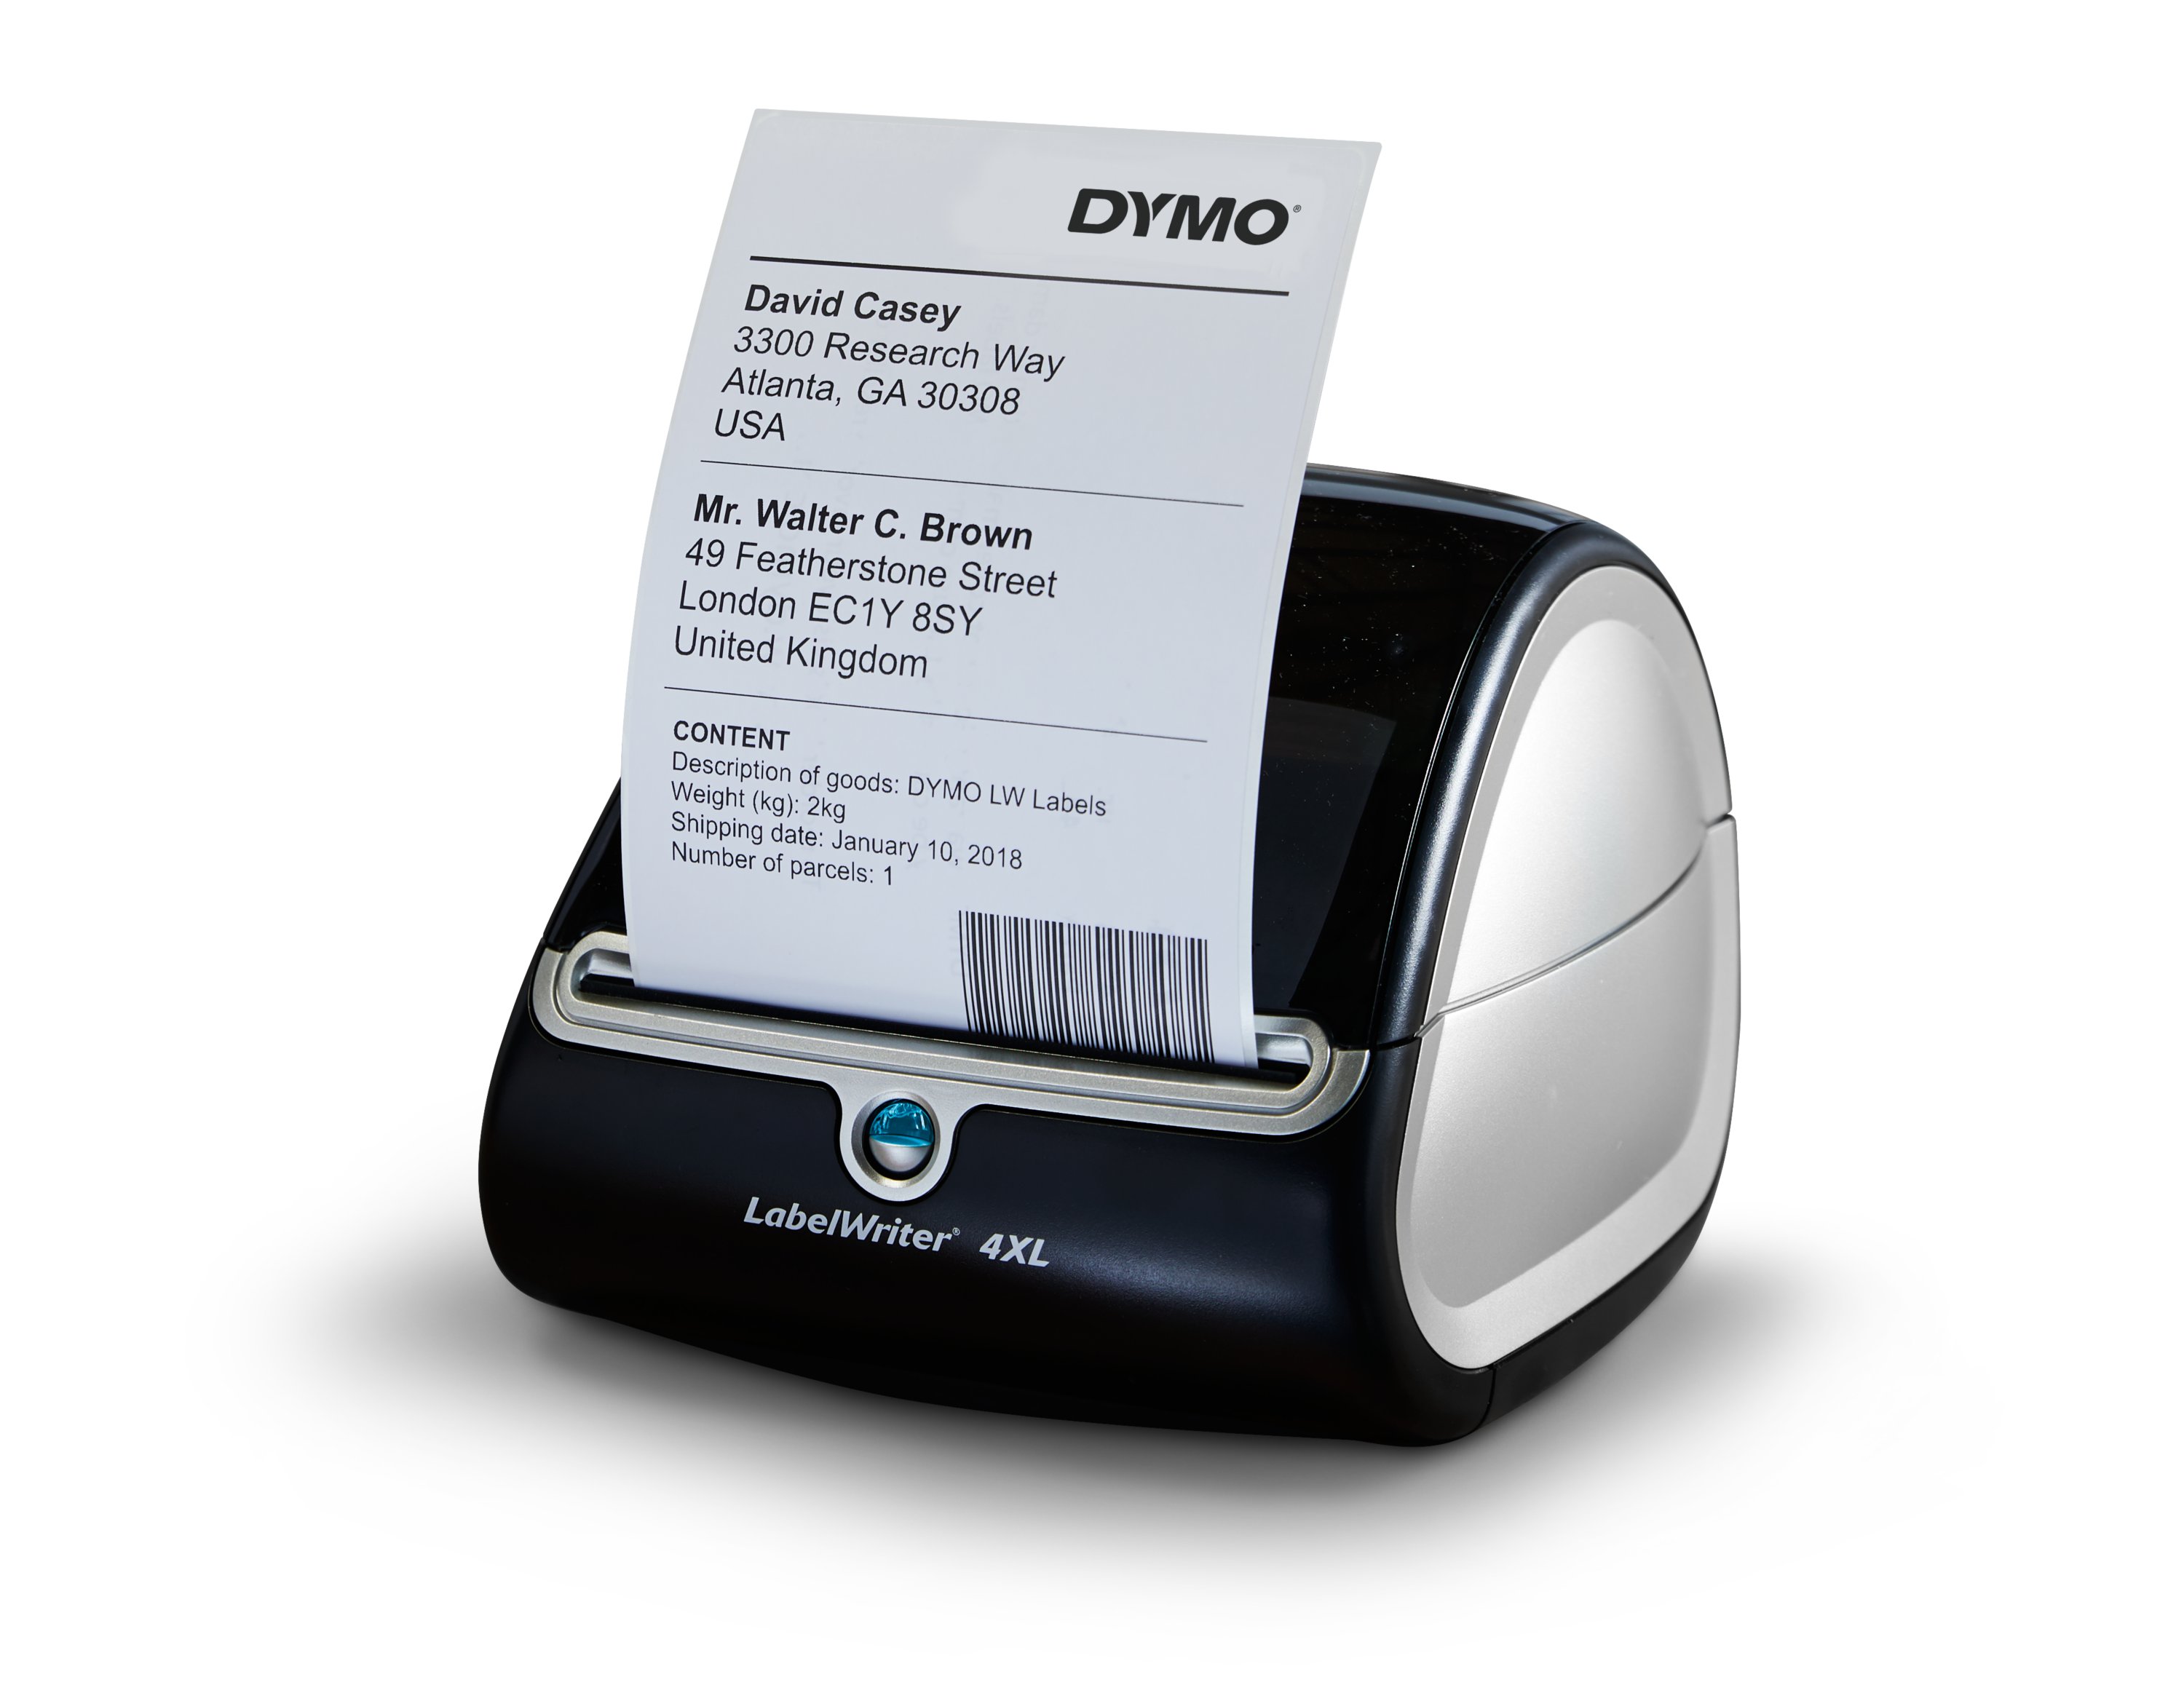 DYMO LabelWriter 23XL Shipping Label Printer, Prints 23" x 23" Extra Throughout Usps Shipping Label Template Download